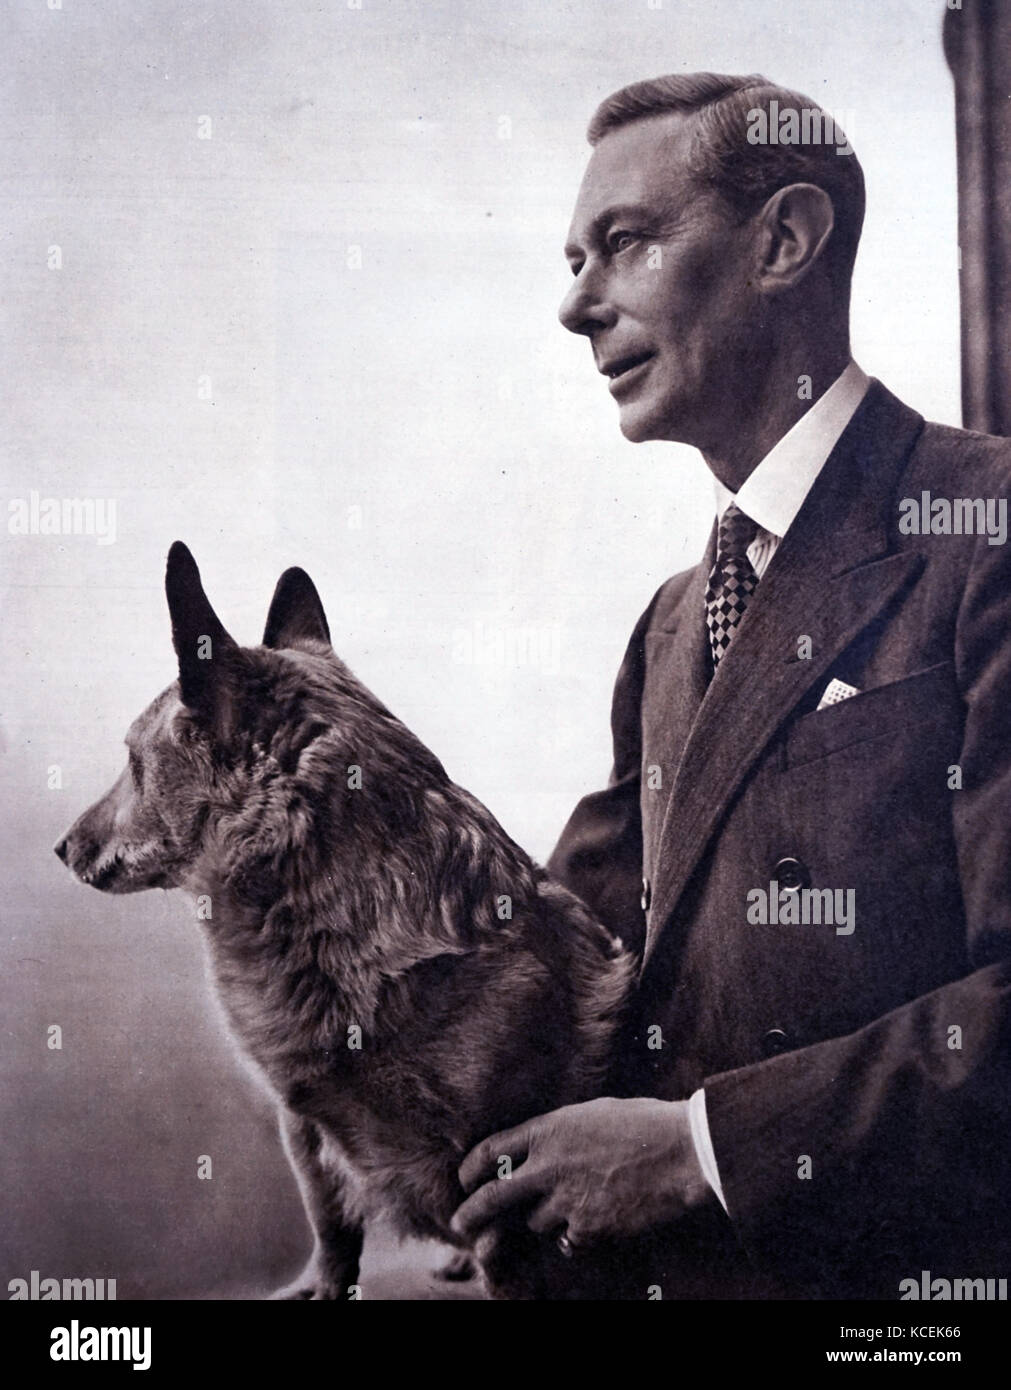 Photographic portrait of King George VI ( 1895-1952) King of the Untied Kingdom and the Dominions of the British Commonwealth as well as the last Emperor of India. Dated 20th Century Stock Photo